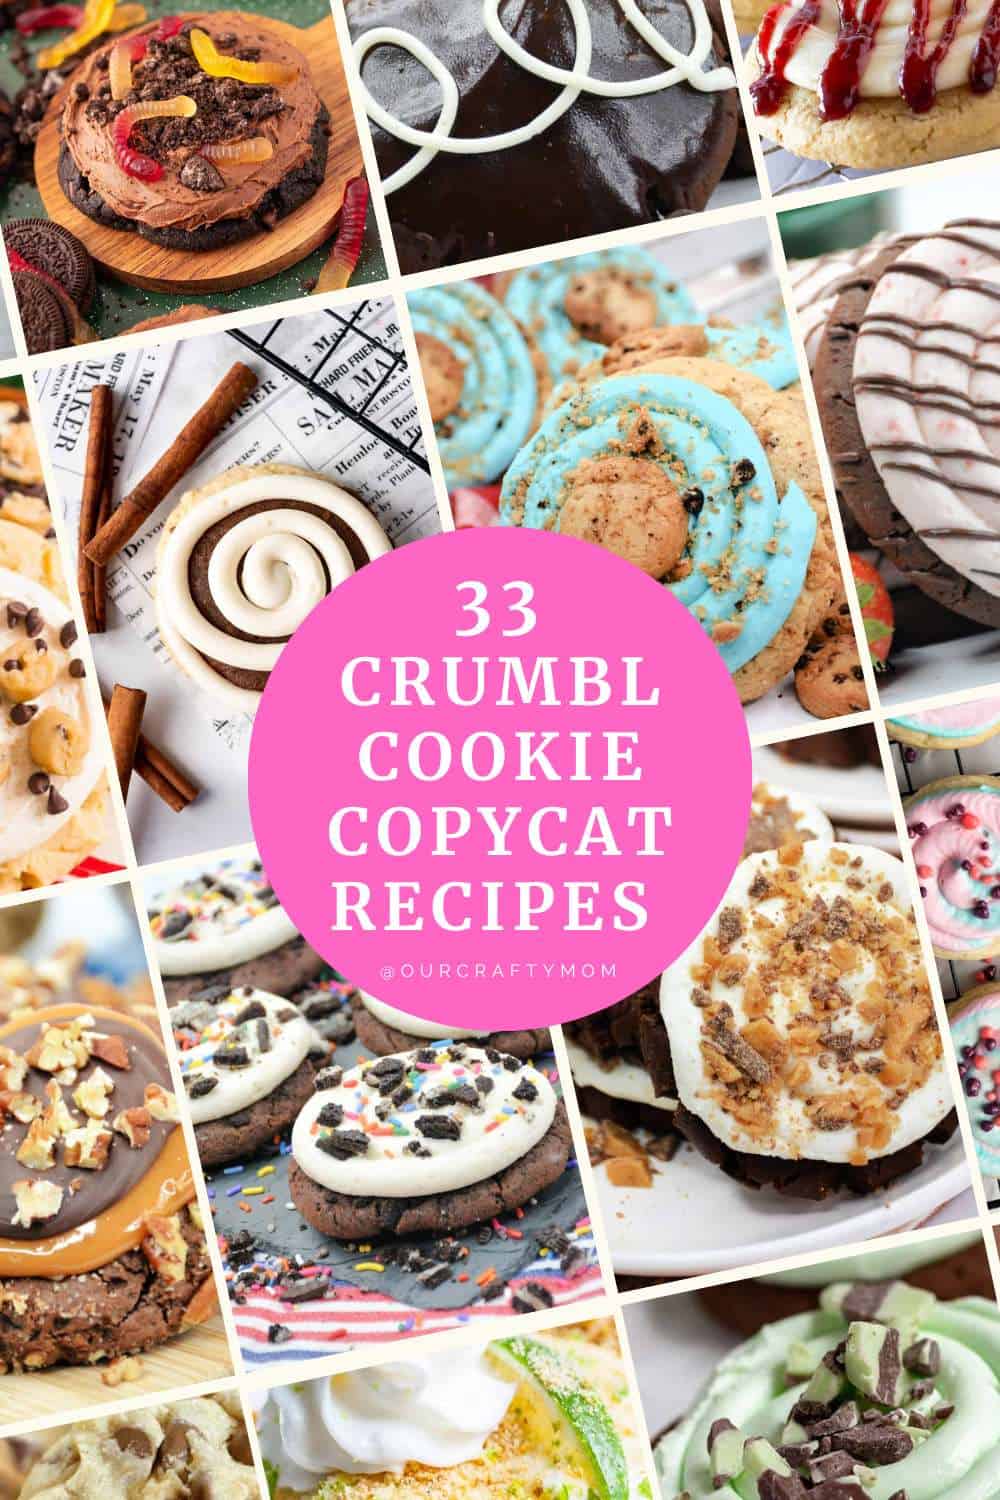 Here are 33 Crumbl cookie copycat recipe ideas you can bake at home. Enjoy the heavenly taste of these famous cookies in your own kitchen! #ourcraftymom #crumblcookiecopycatrecipe #crumblcookierecipes